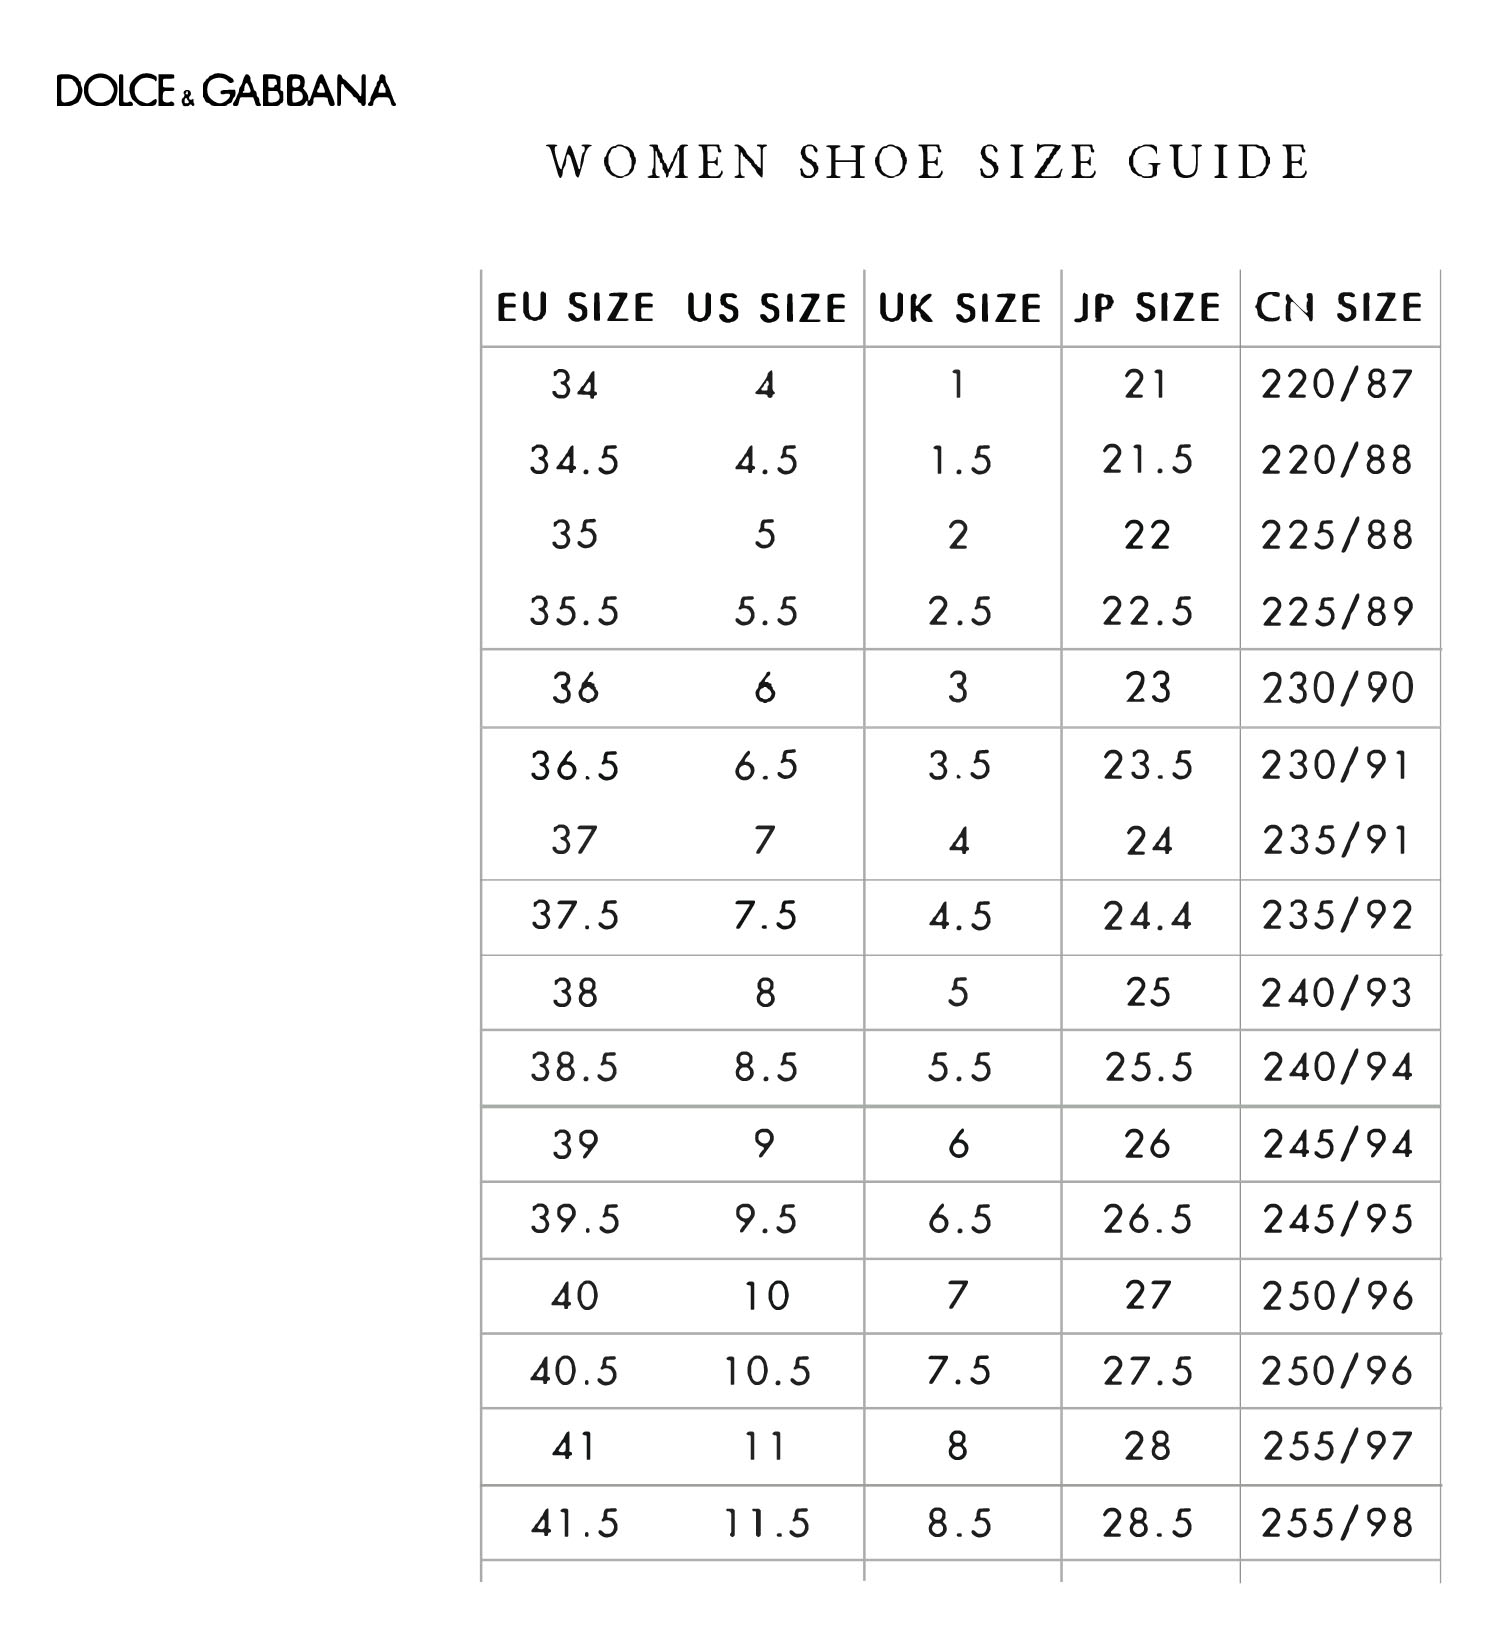 dolce gabbana shoes size guide